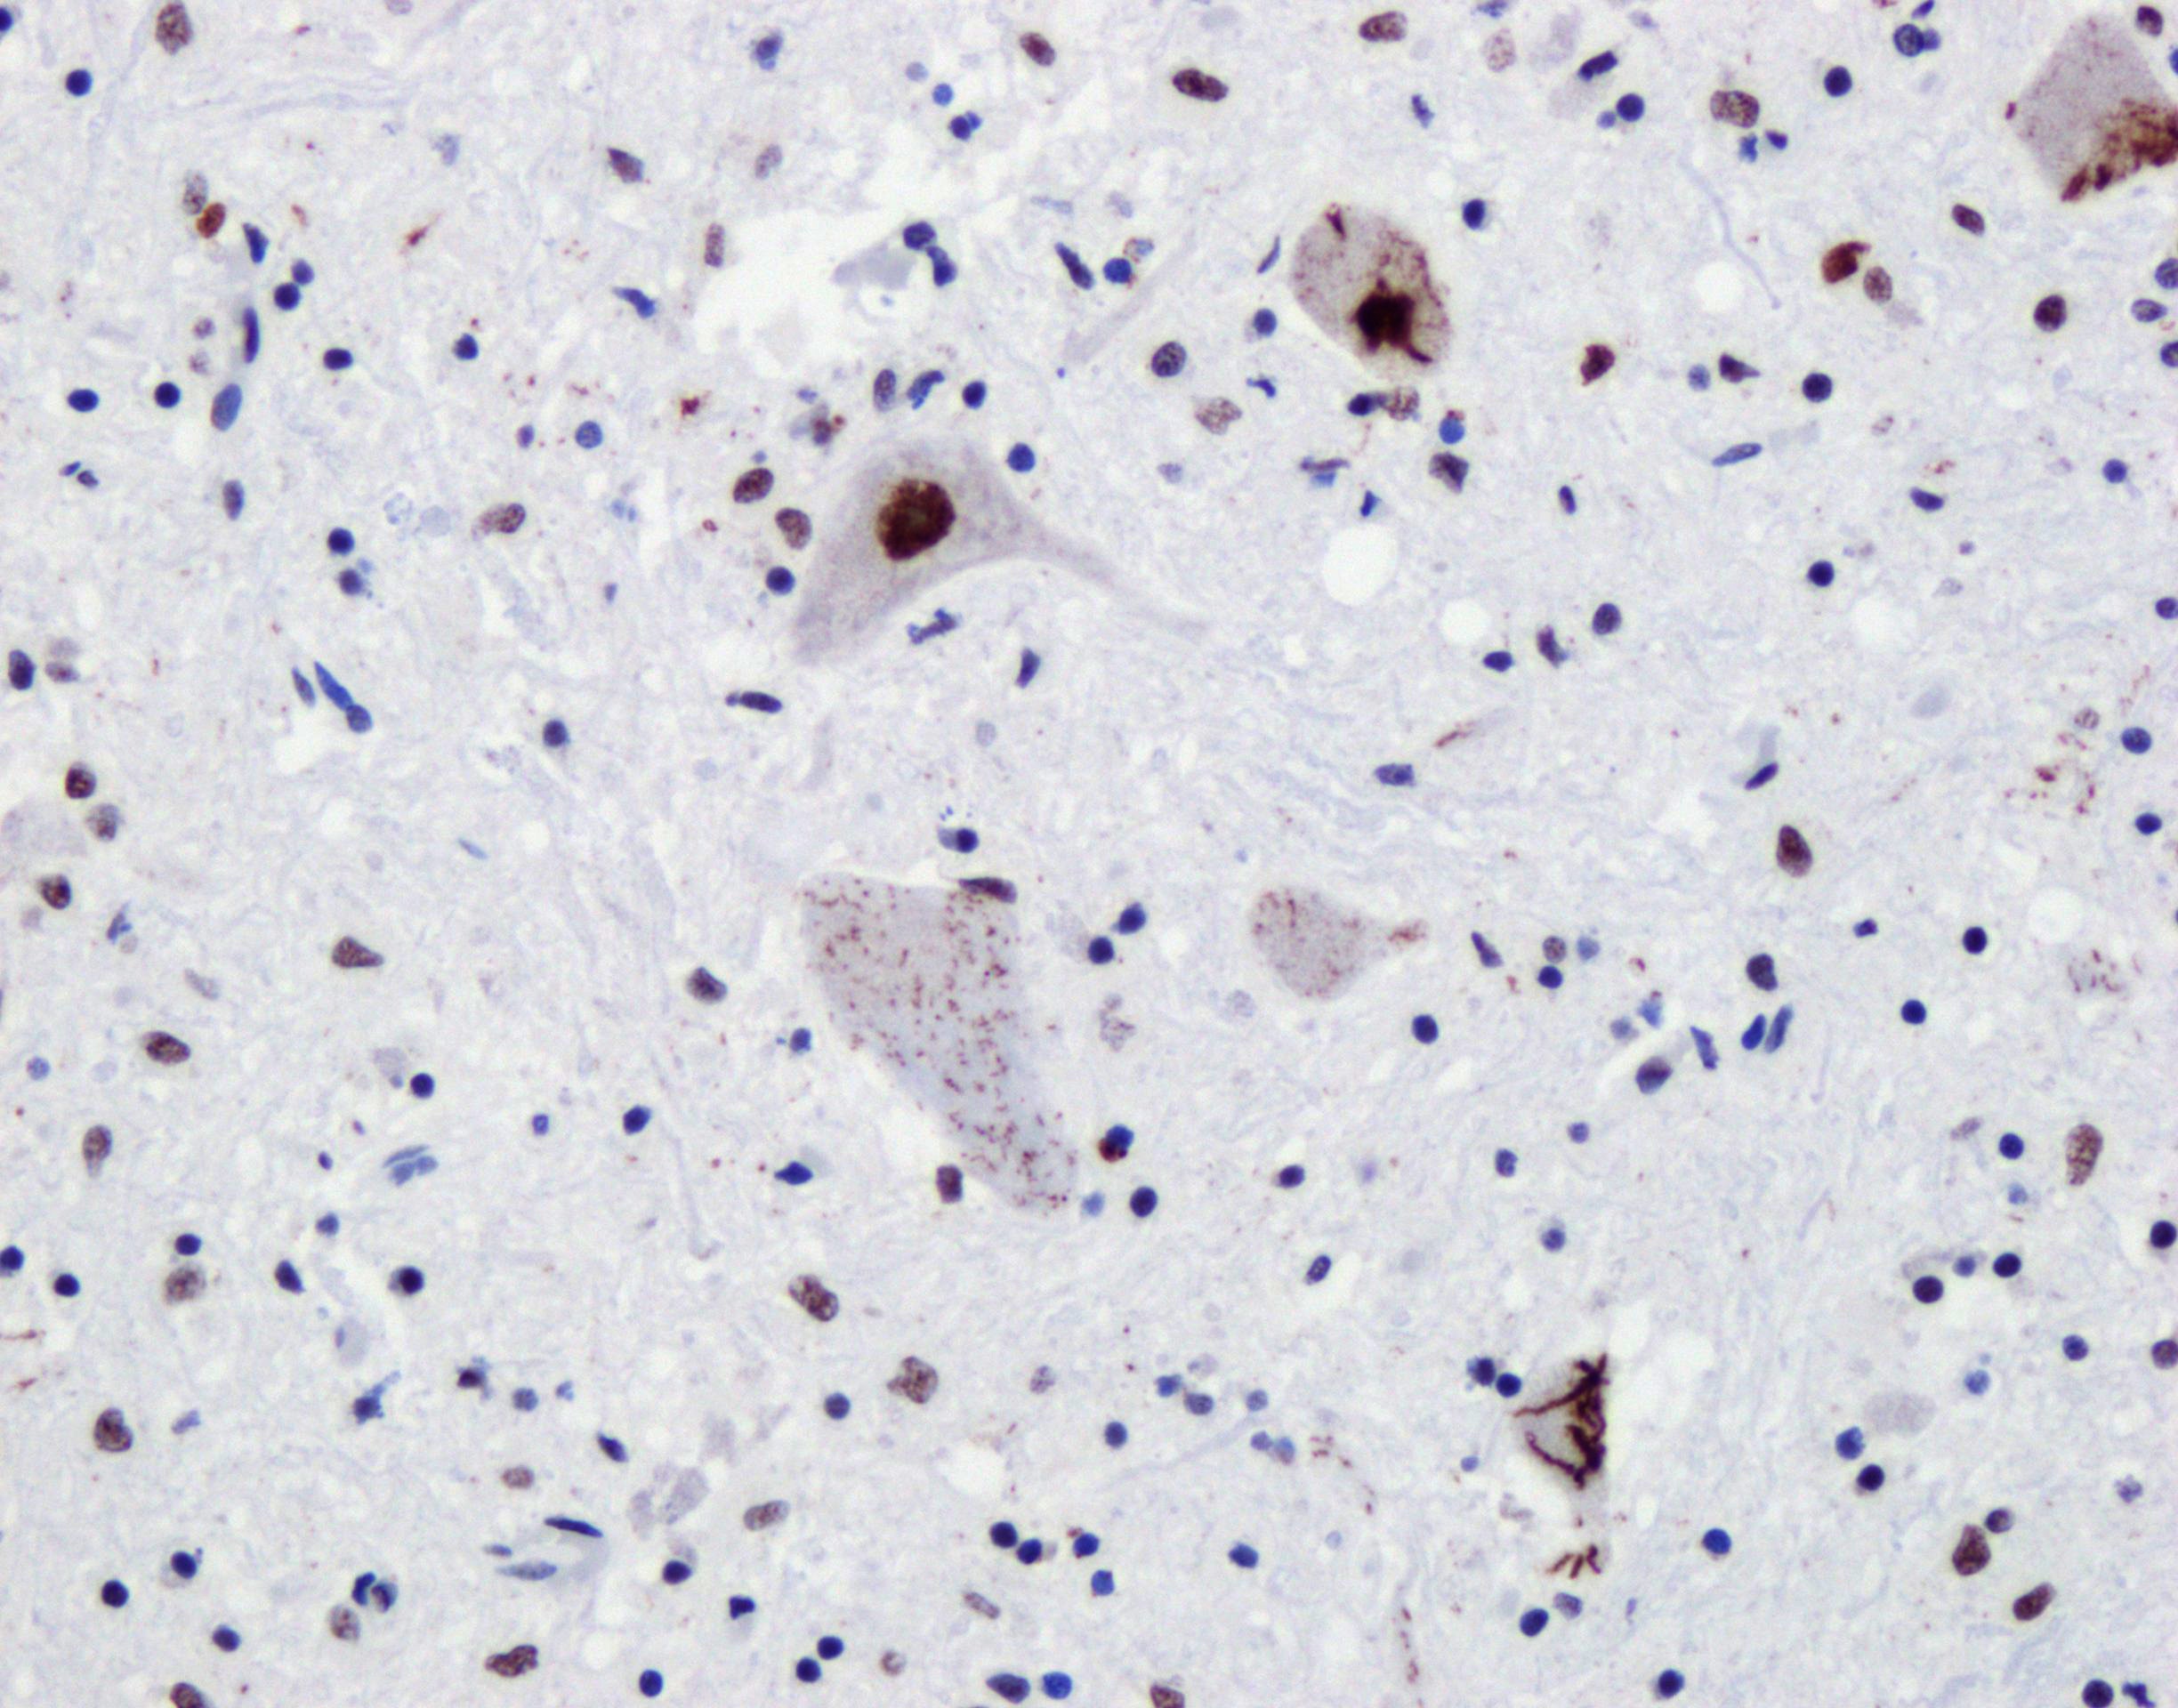 IHC staining of spinal cord slides from ALS patients using 80001-1-RR